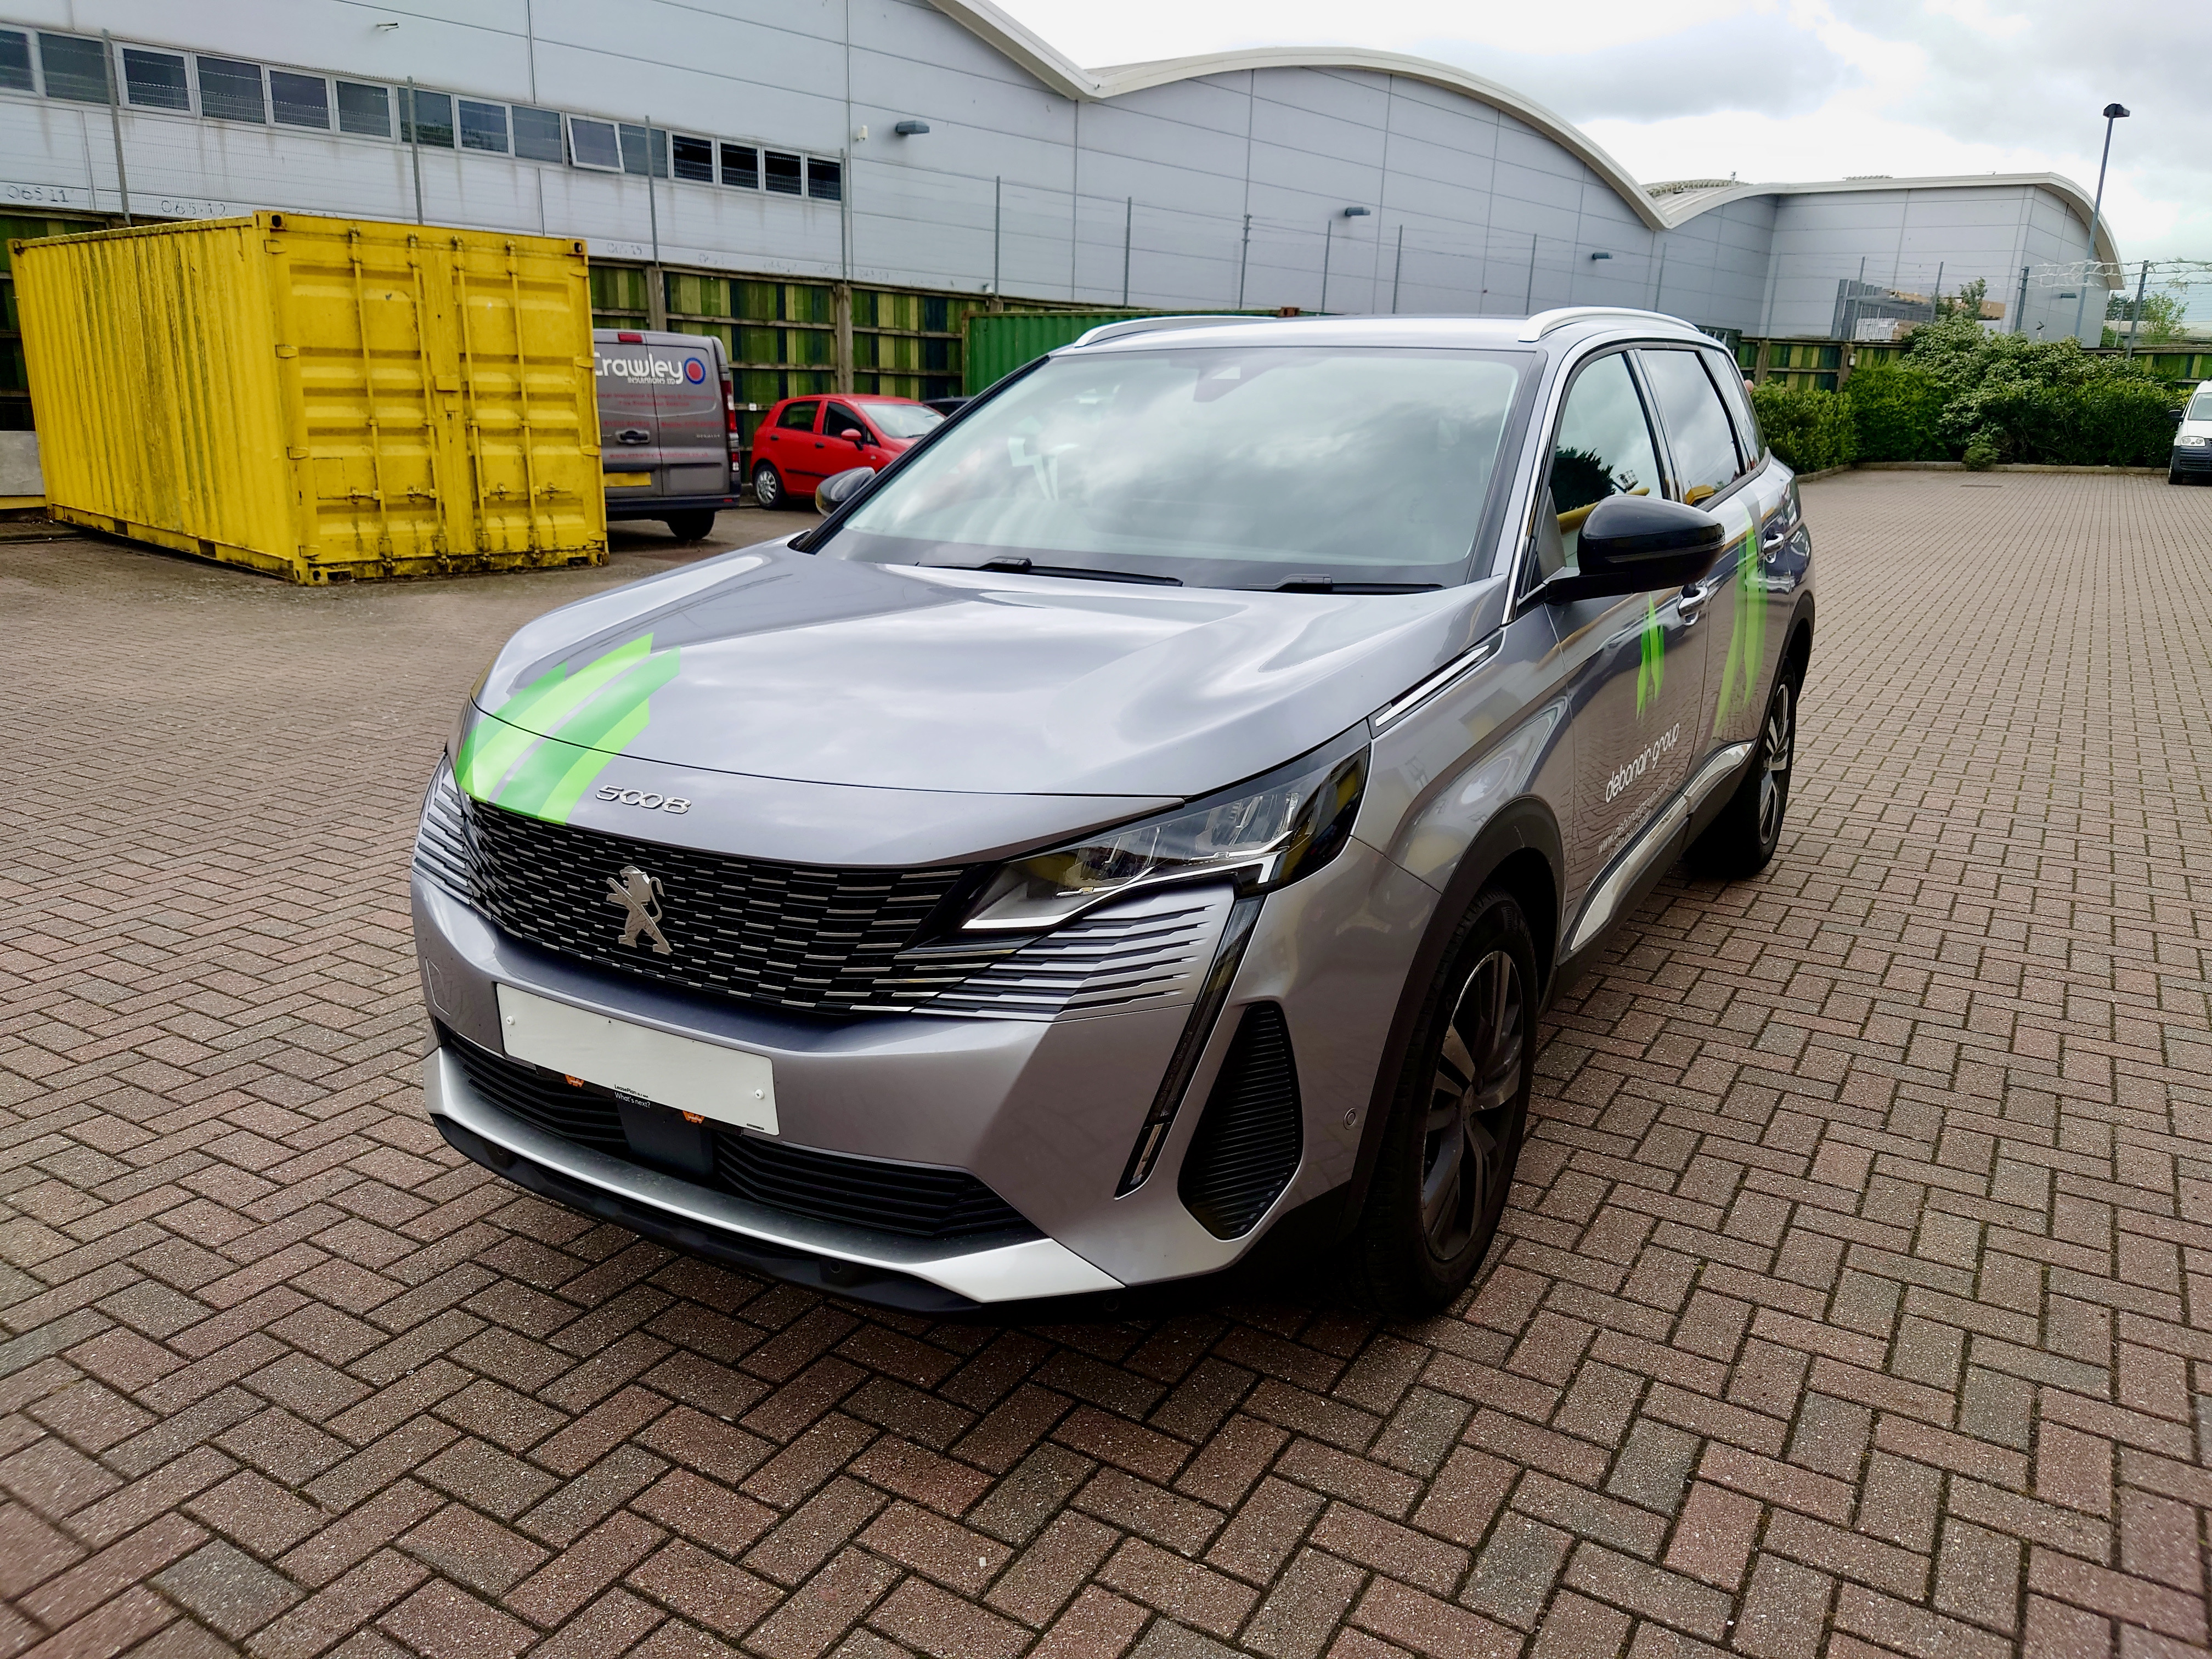 Peugeot 5008 Wrapped in Ashford in car wrap emotion wraps